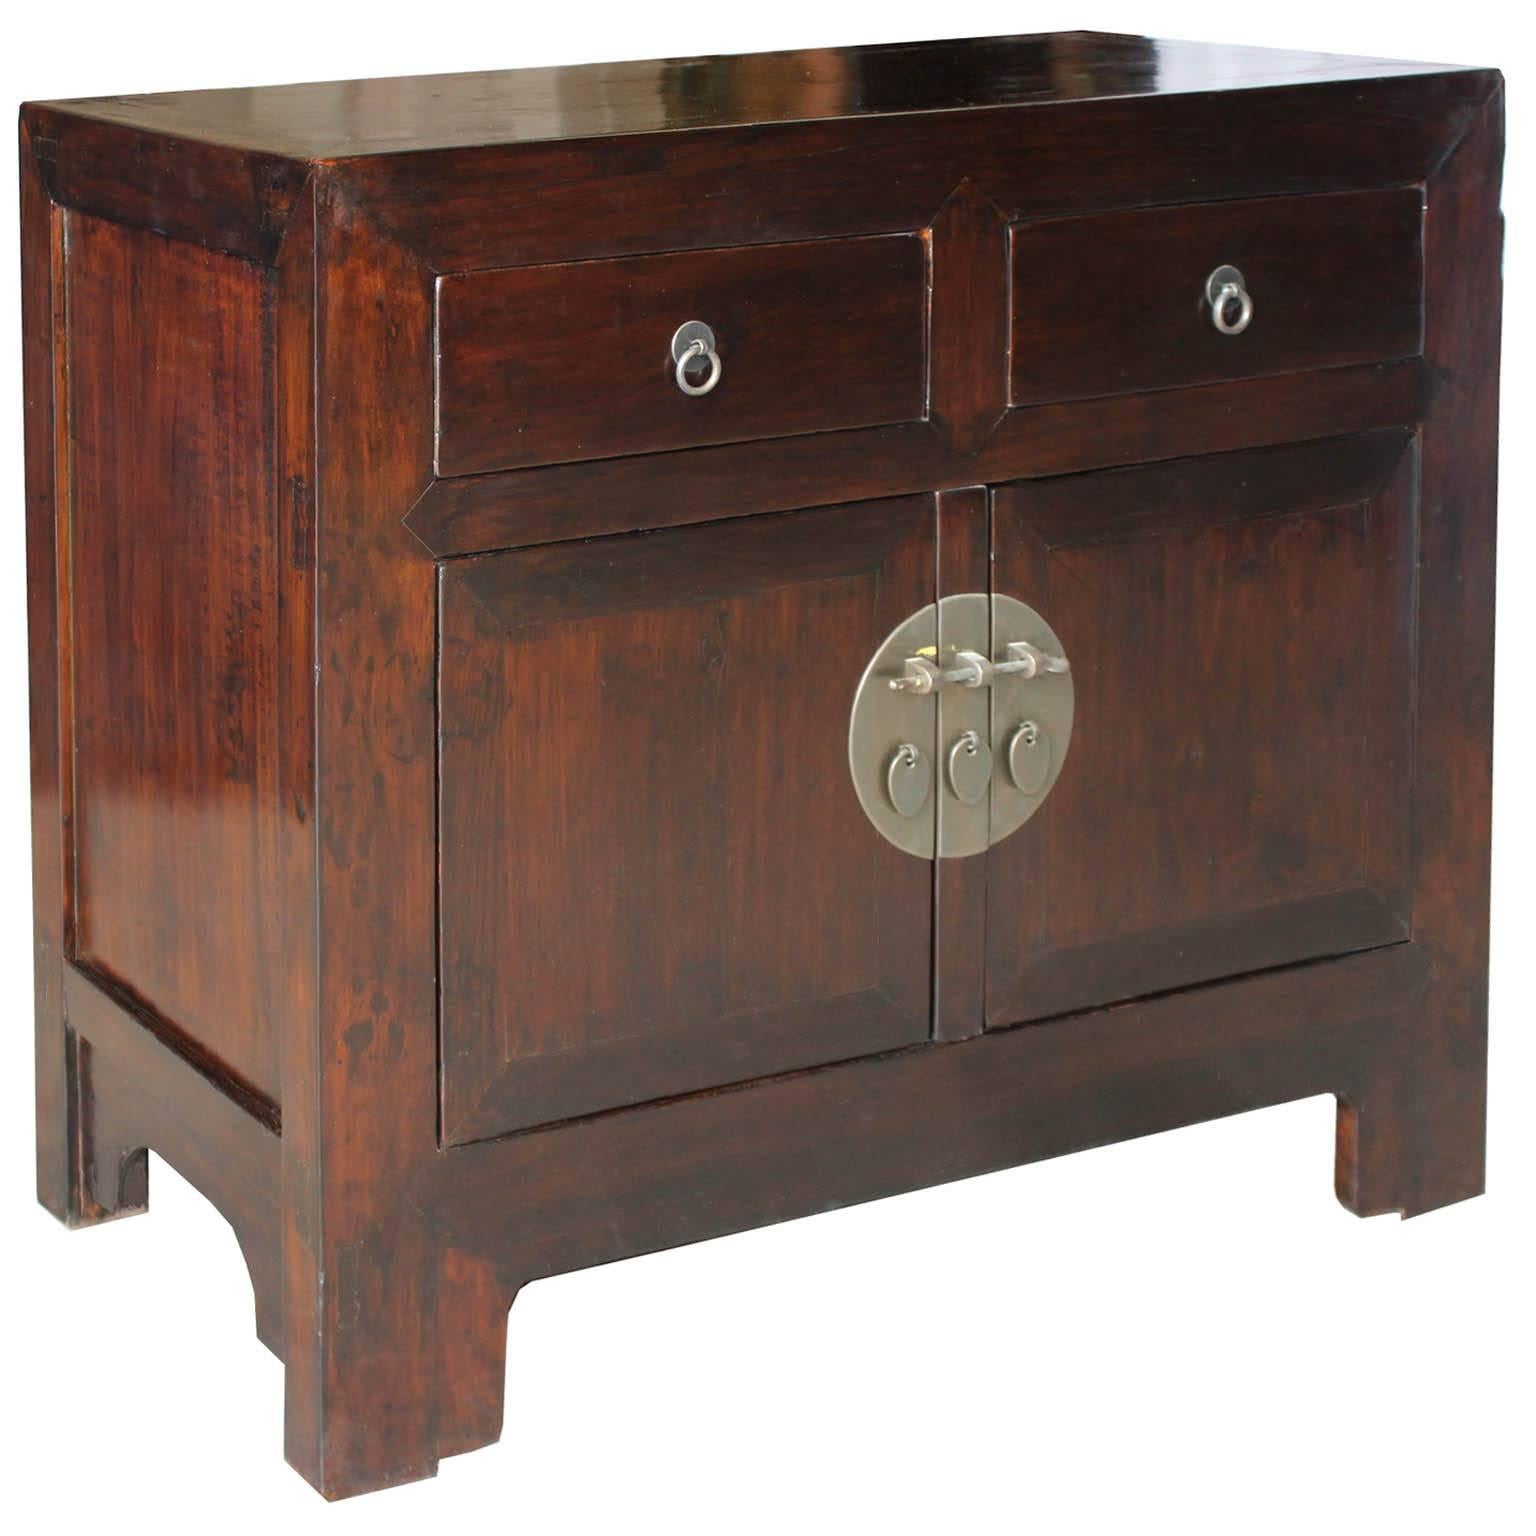 Two-door elm side chest with straight bottom skirt. New hardware. Beijing, China, circa 1900. Some wear.